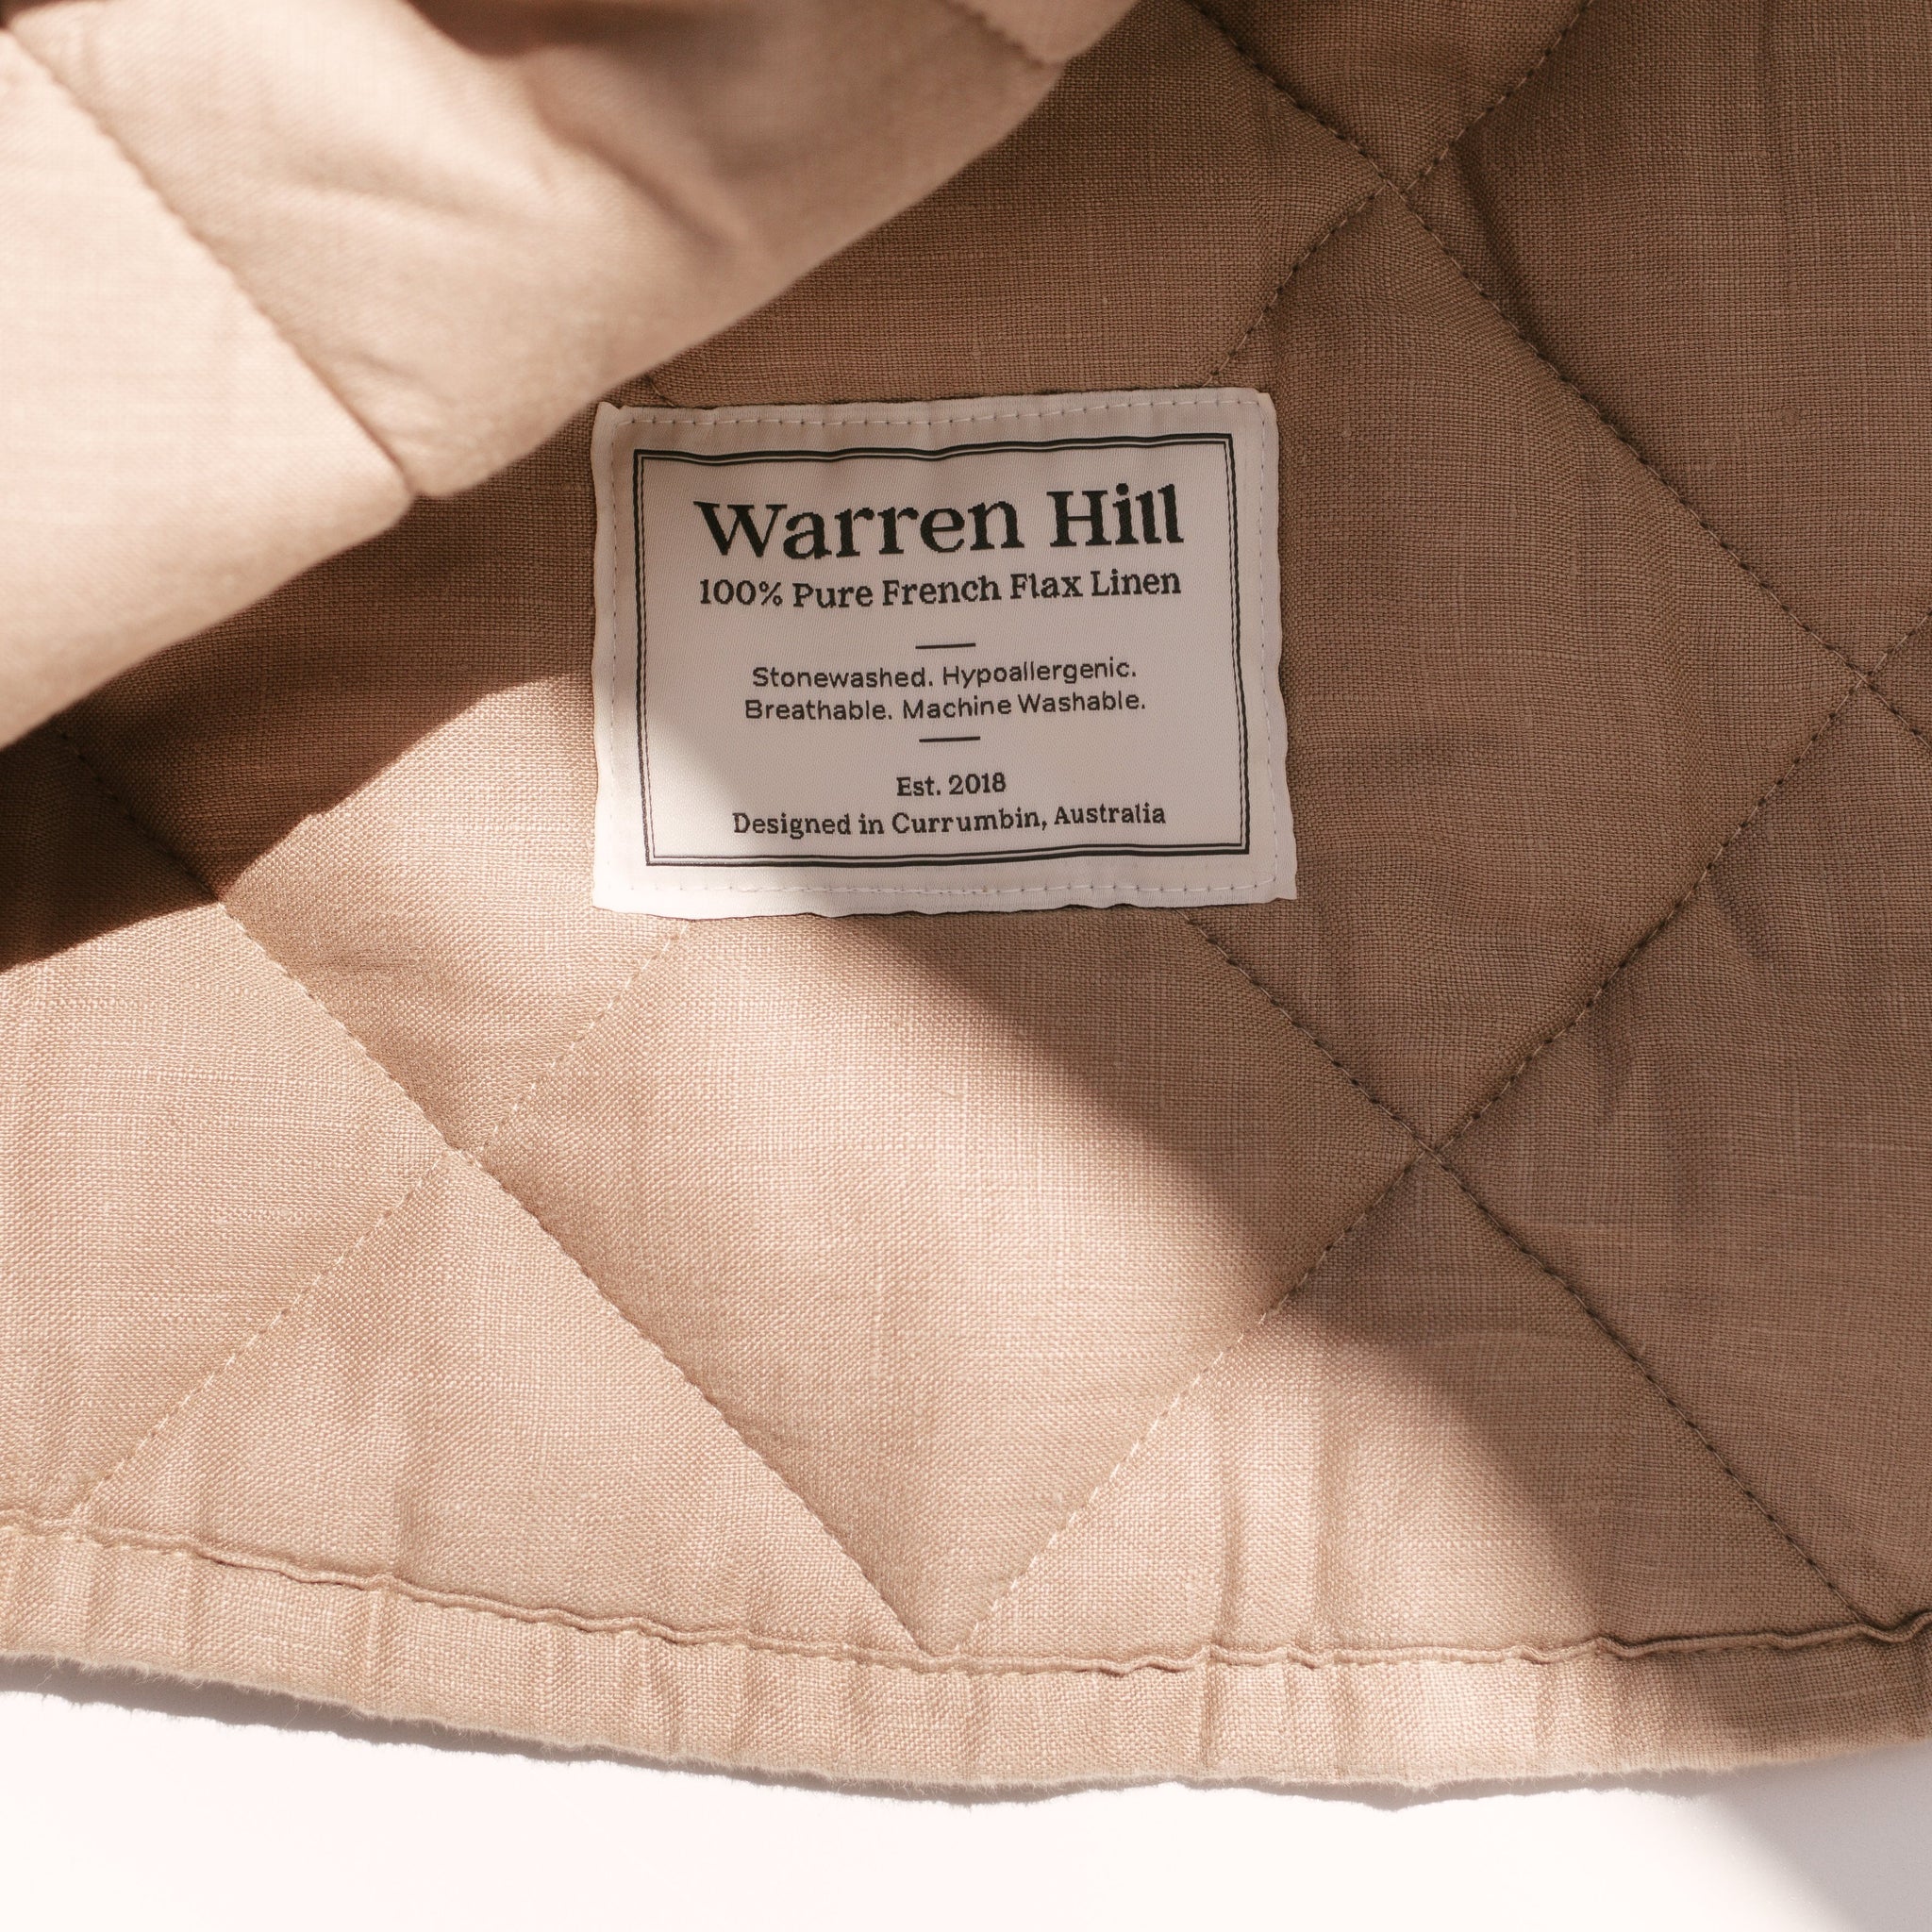 Our Warren Hill baby play mat is made from 100% Pure French Flax Linen with a soft, polyester filling that provides cushion and support for your child's delicate skin. Our linen is stonewashed giving it that beautiful soft, worn-in feel from the first time your child plays on it. Linen is naturally hypoallergenic, extremely durable, and one of the most sustainable materials to harvest and produce in the textile industry.